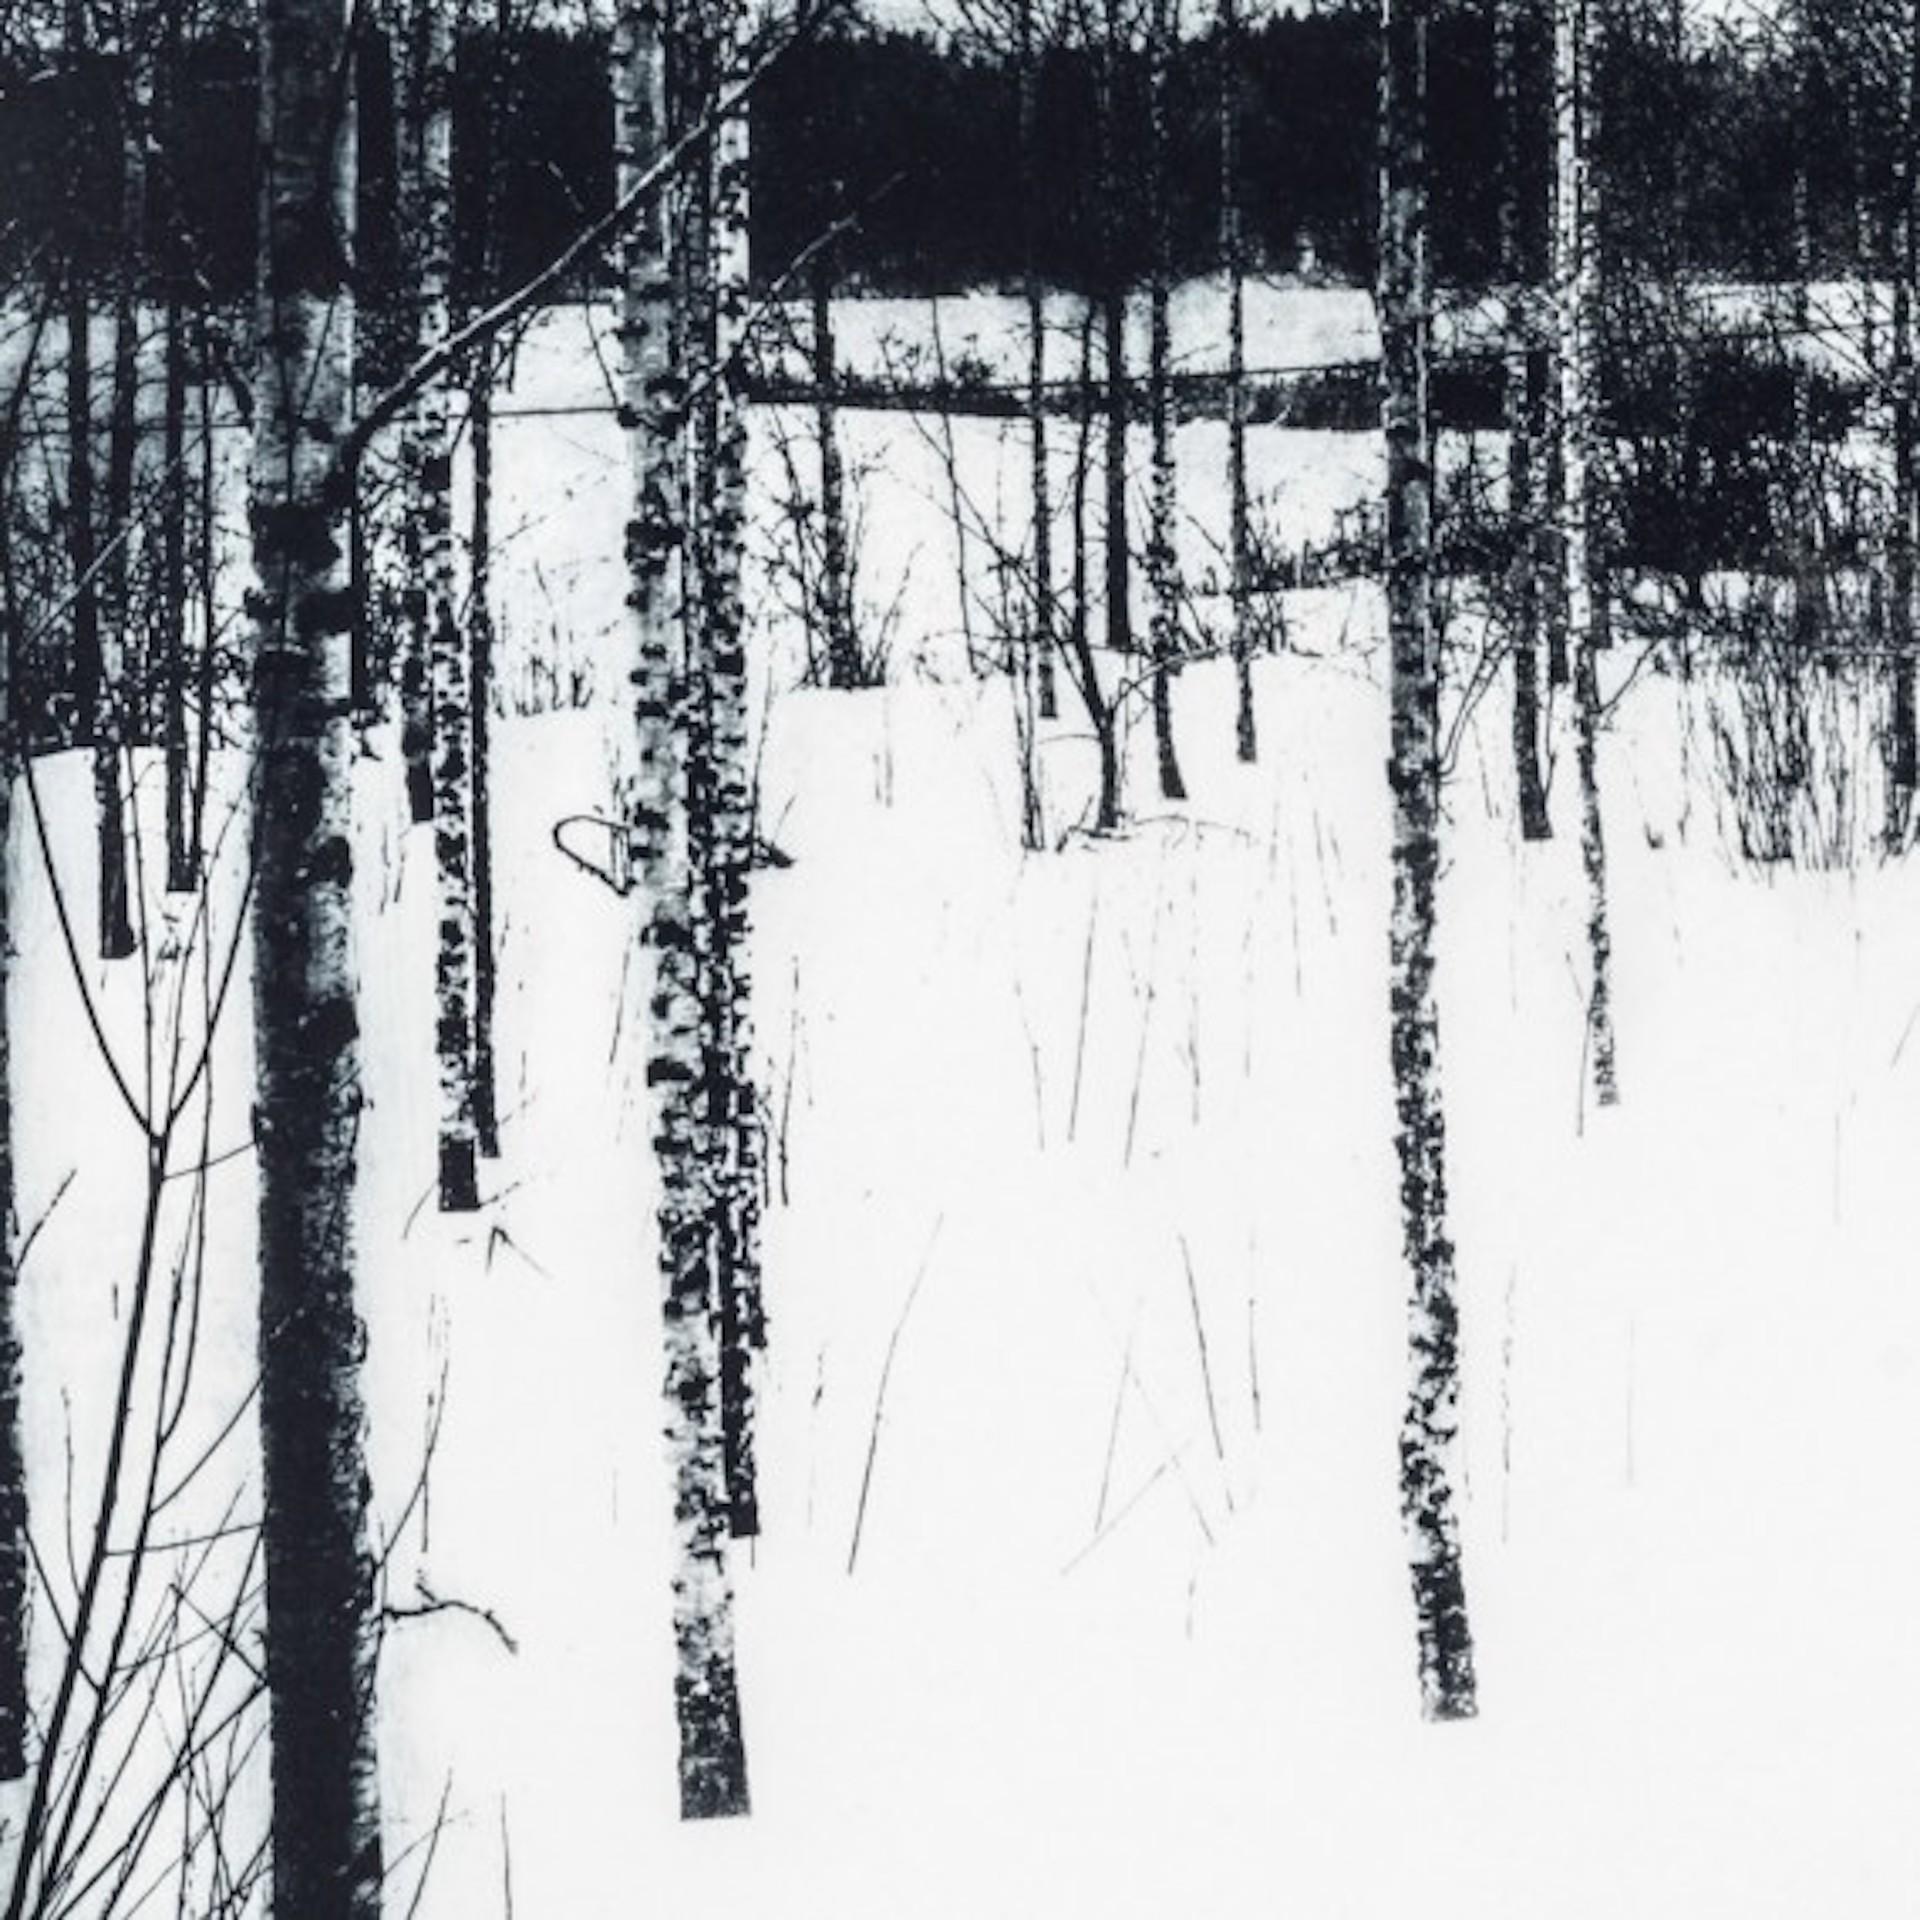 Neula is a limited edition signed etching print on paper by Sarah Duncan of a black and white snowy forest in the winter with the trees bare and snow on the ground. This work is in a limited edition of 10 pieces.
Sarah Duncan is available online and